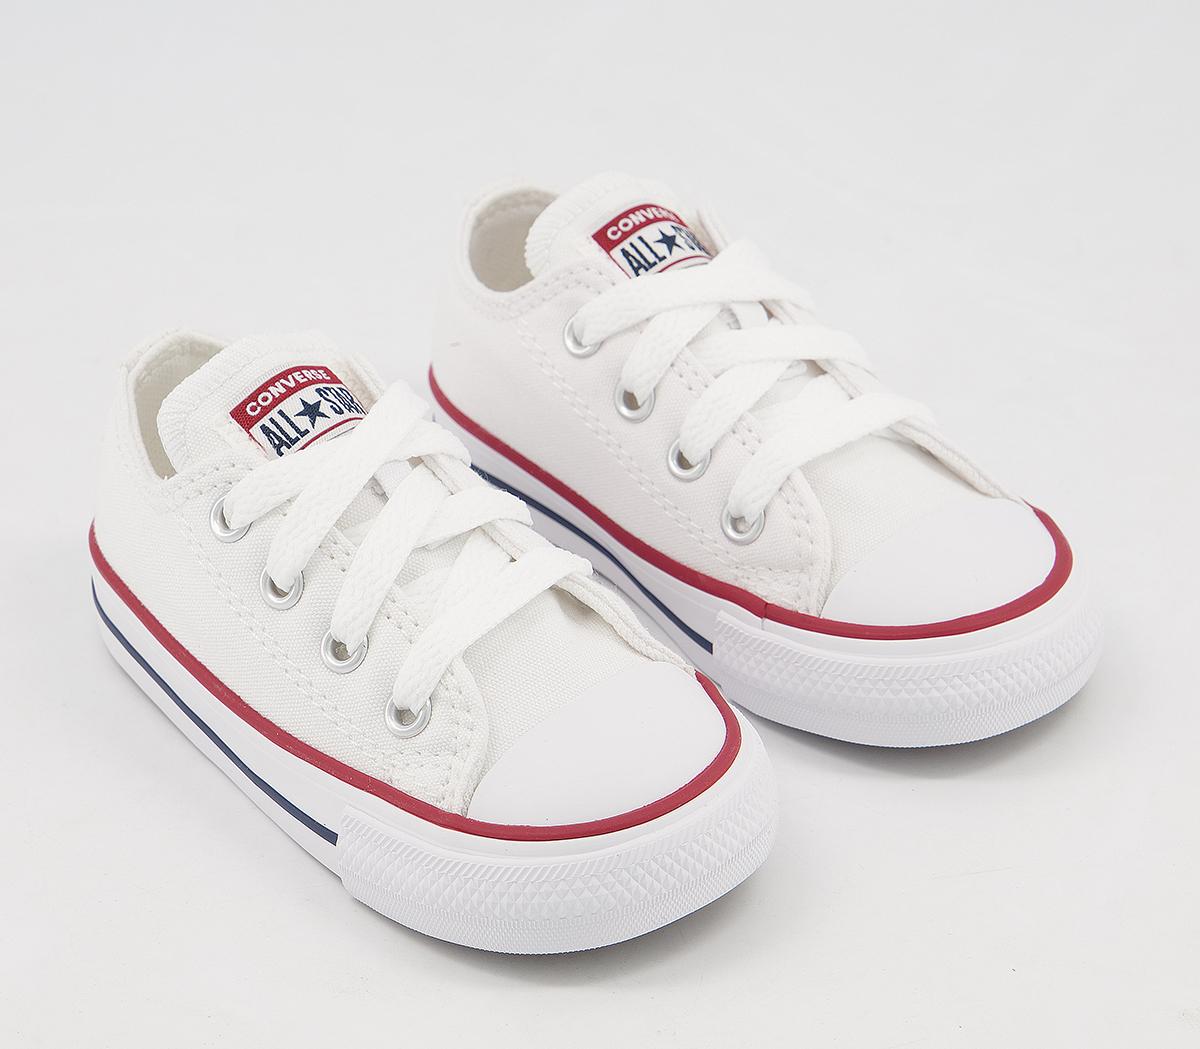 Converse Kids White All Star Low Shoes, 3 Infant-10 Youth, 5 Infant